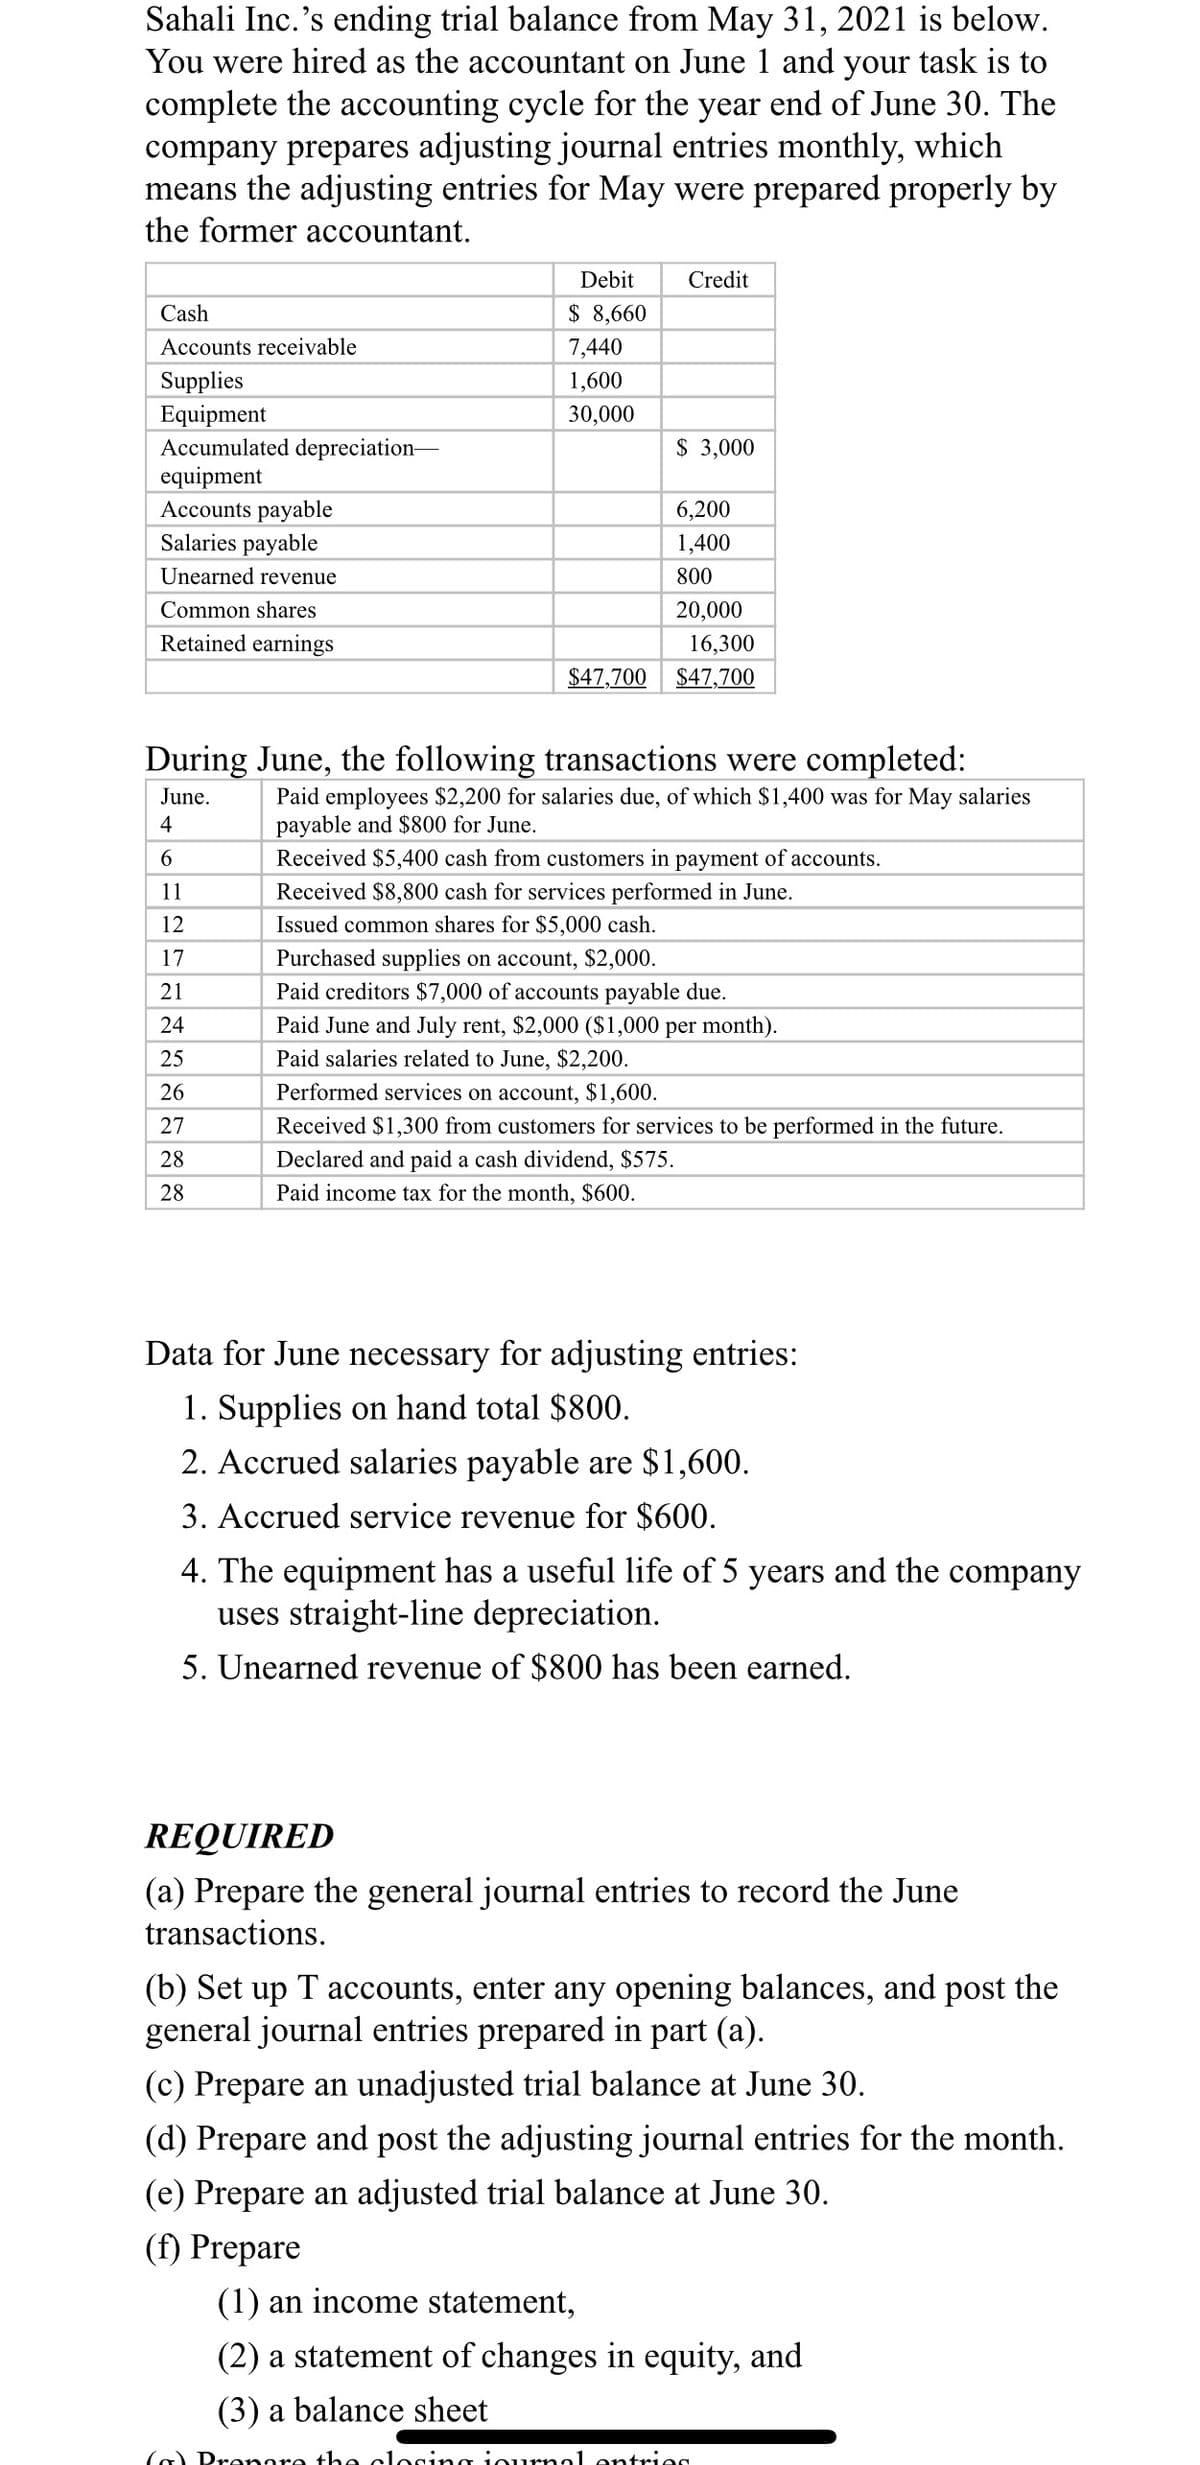 Sahali Inc.'s ending trial balance from May 31, 2021 is below.
You were hired as the accountant on June 1 and your task is to
complete the accounting cycle for the year end of June 30. The
company prepares adjusting journal entries monthly, which
means the adjusting entries for May were prepared properly by
the former accountant.
Debit
Credit
Cash
$ 8,660
Accounts receivable
7,440
Supplies
1,600
Equipment
Accumulated depreciation-
equipment
Accounts payable
Salaries payable
30,000
$ 3,000
6,200
1,400
Unearned revenue
800
Common shares
20,000
Retained earnings
16,300
$47,700
$47,700
During June, the following transactions were completed:
Paid employees $2,200 for salaries due, of which $1,400 was for May salaries
payable and $800 for June.
June.
4
6.
Received $5,400 cash from customers in payment of accounts.
11
Received $8,800 cash for services performed in June.
12
Issued common shares for $5,000 cash.
Purchased supplies on account, $2,000.
Paid creditors $7,000 of accounts payable due.
17
21
24
Paid June and July rent, $2,000 ($1,000 per month).
25
Paid salaries related to June, $2,200.
26
Performed services on account, $1,600.
27
Received $1,300 from customers for services to be performed in the future.
Declared and paid a cash dividend, $575.
Paid income tax for the month, $600.
28
28
Data for June necessary for adjusting entries:
1. Supplies on hand total $800.
2. Accrued salaries payable are $1,600.
3. Accrued service revenue for $600.
4. The equipment has a useful life of 5 years and the company
uses straight-line depreciation.
5. Unearned revenue of $800 has been earned.
REQUIRED
(a) Prepare the general journal entries to record the June
transactions.
(b) Set up T accounts, enter any opening balances, and post the
general journal entries prepared in part (a).
(c) Prepare an unadjusted trial balance at June 30.
(d) Prepare and post the adjusting journal entries for the month.
(e) Prepare an adjusted trial balance at June 30.
(f) Prepare
(1) an income statement,
(2) a statement of changes in equity, and
(3) a balance sheet
